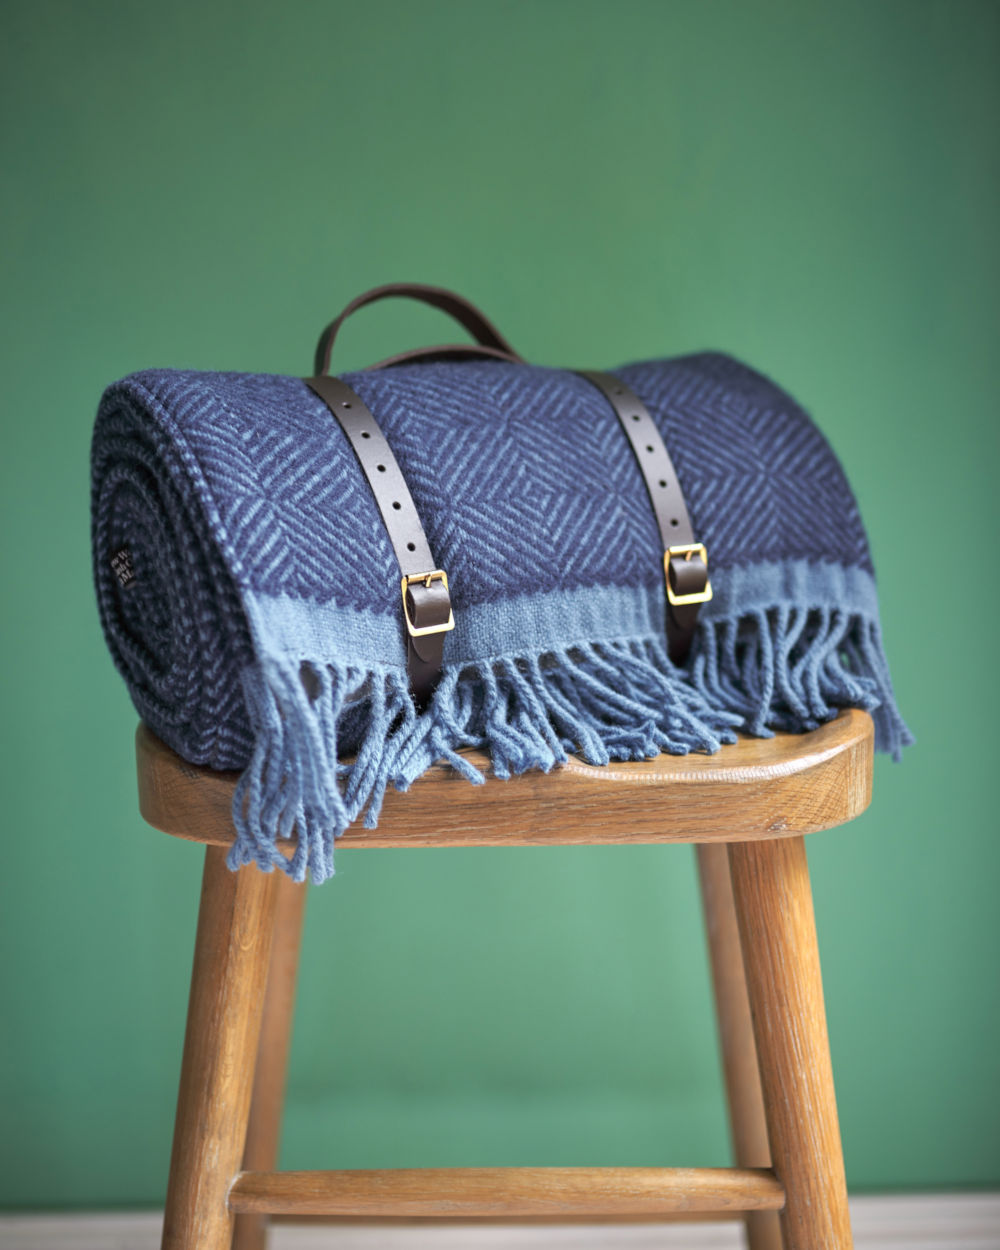 Blue wool picnic blanket with leather straps on stool from The British Blanket Company